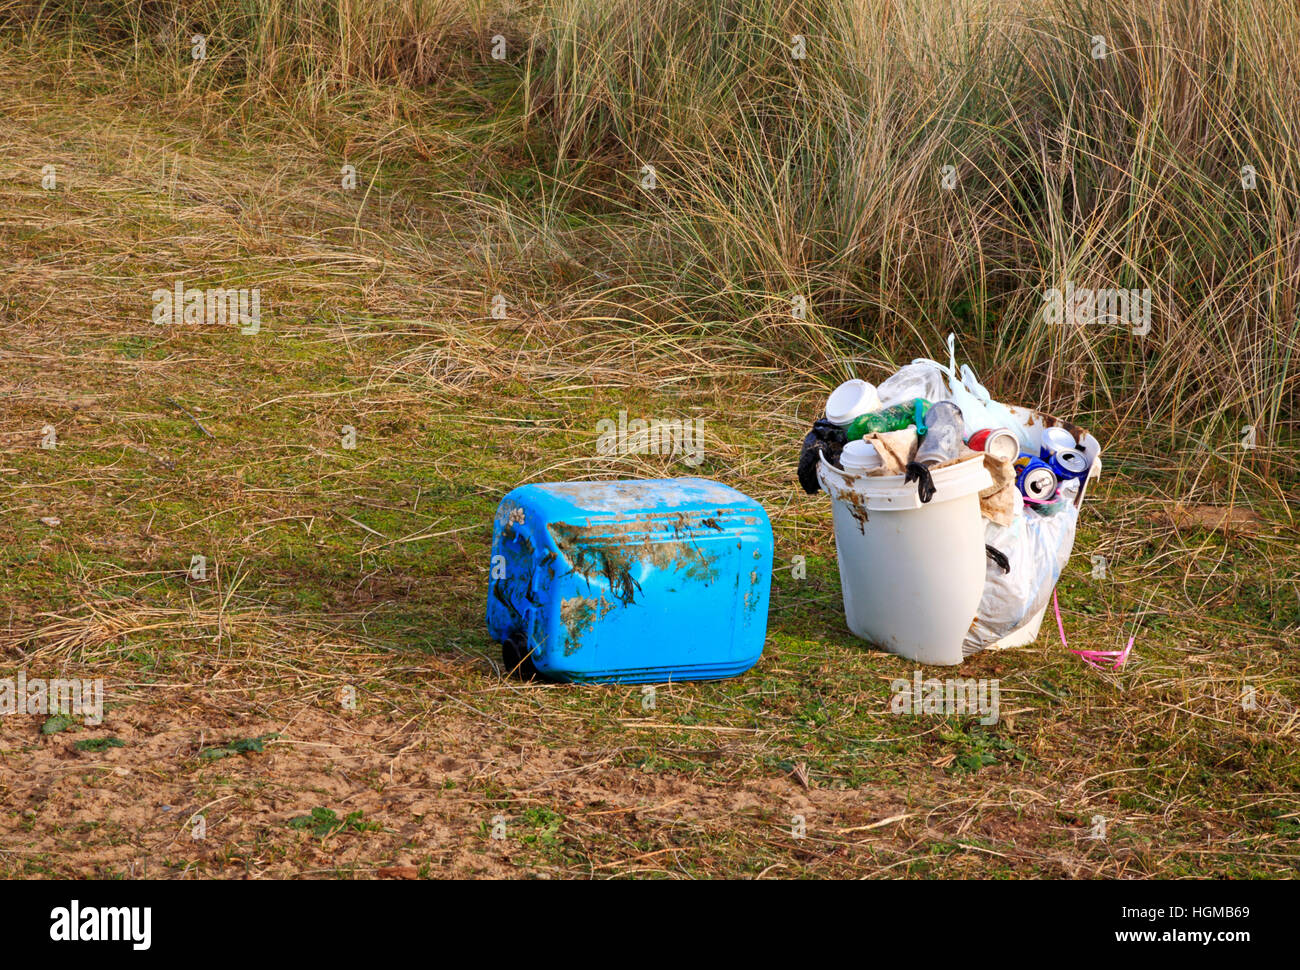 Rubbish collected in the sand dunes at Burnham Overy, Norfolk, England, United Kingdom. Stock Photo